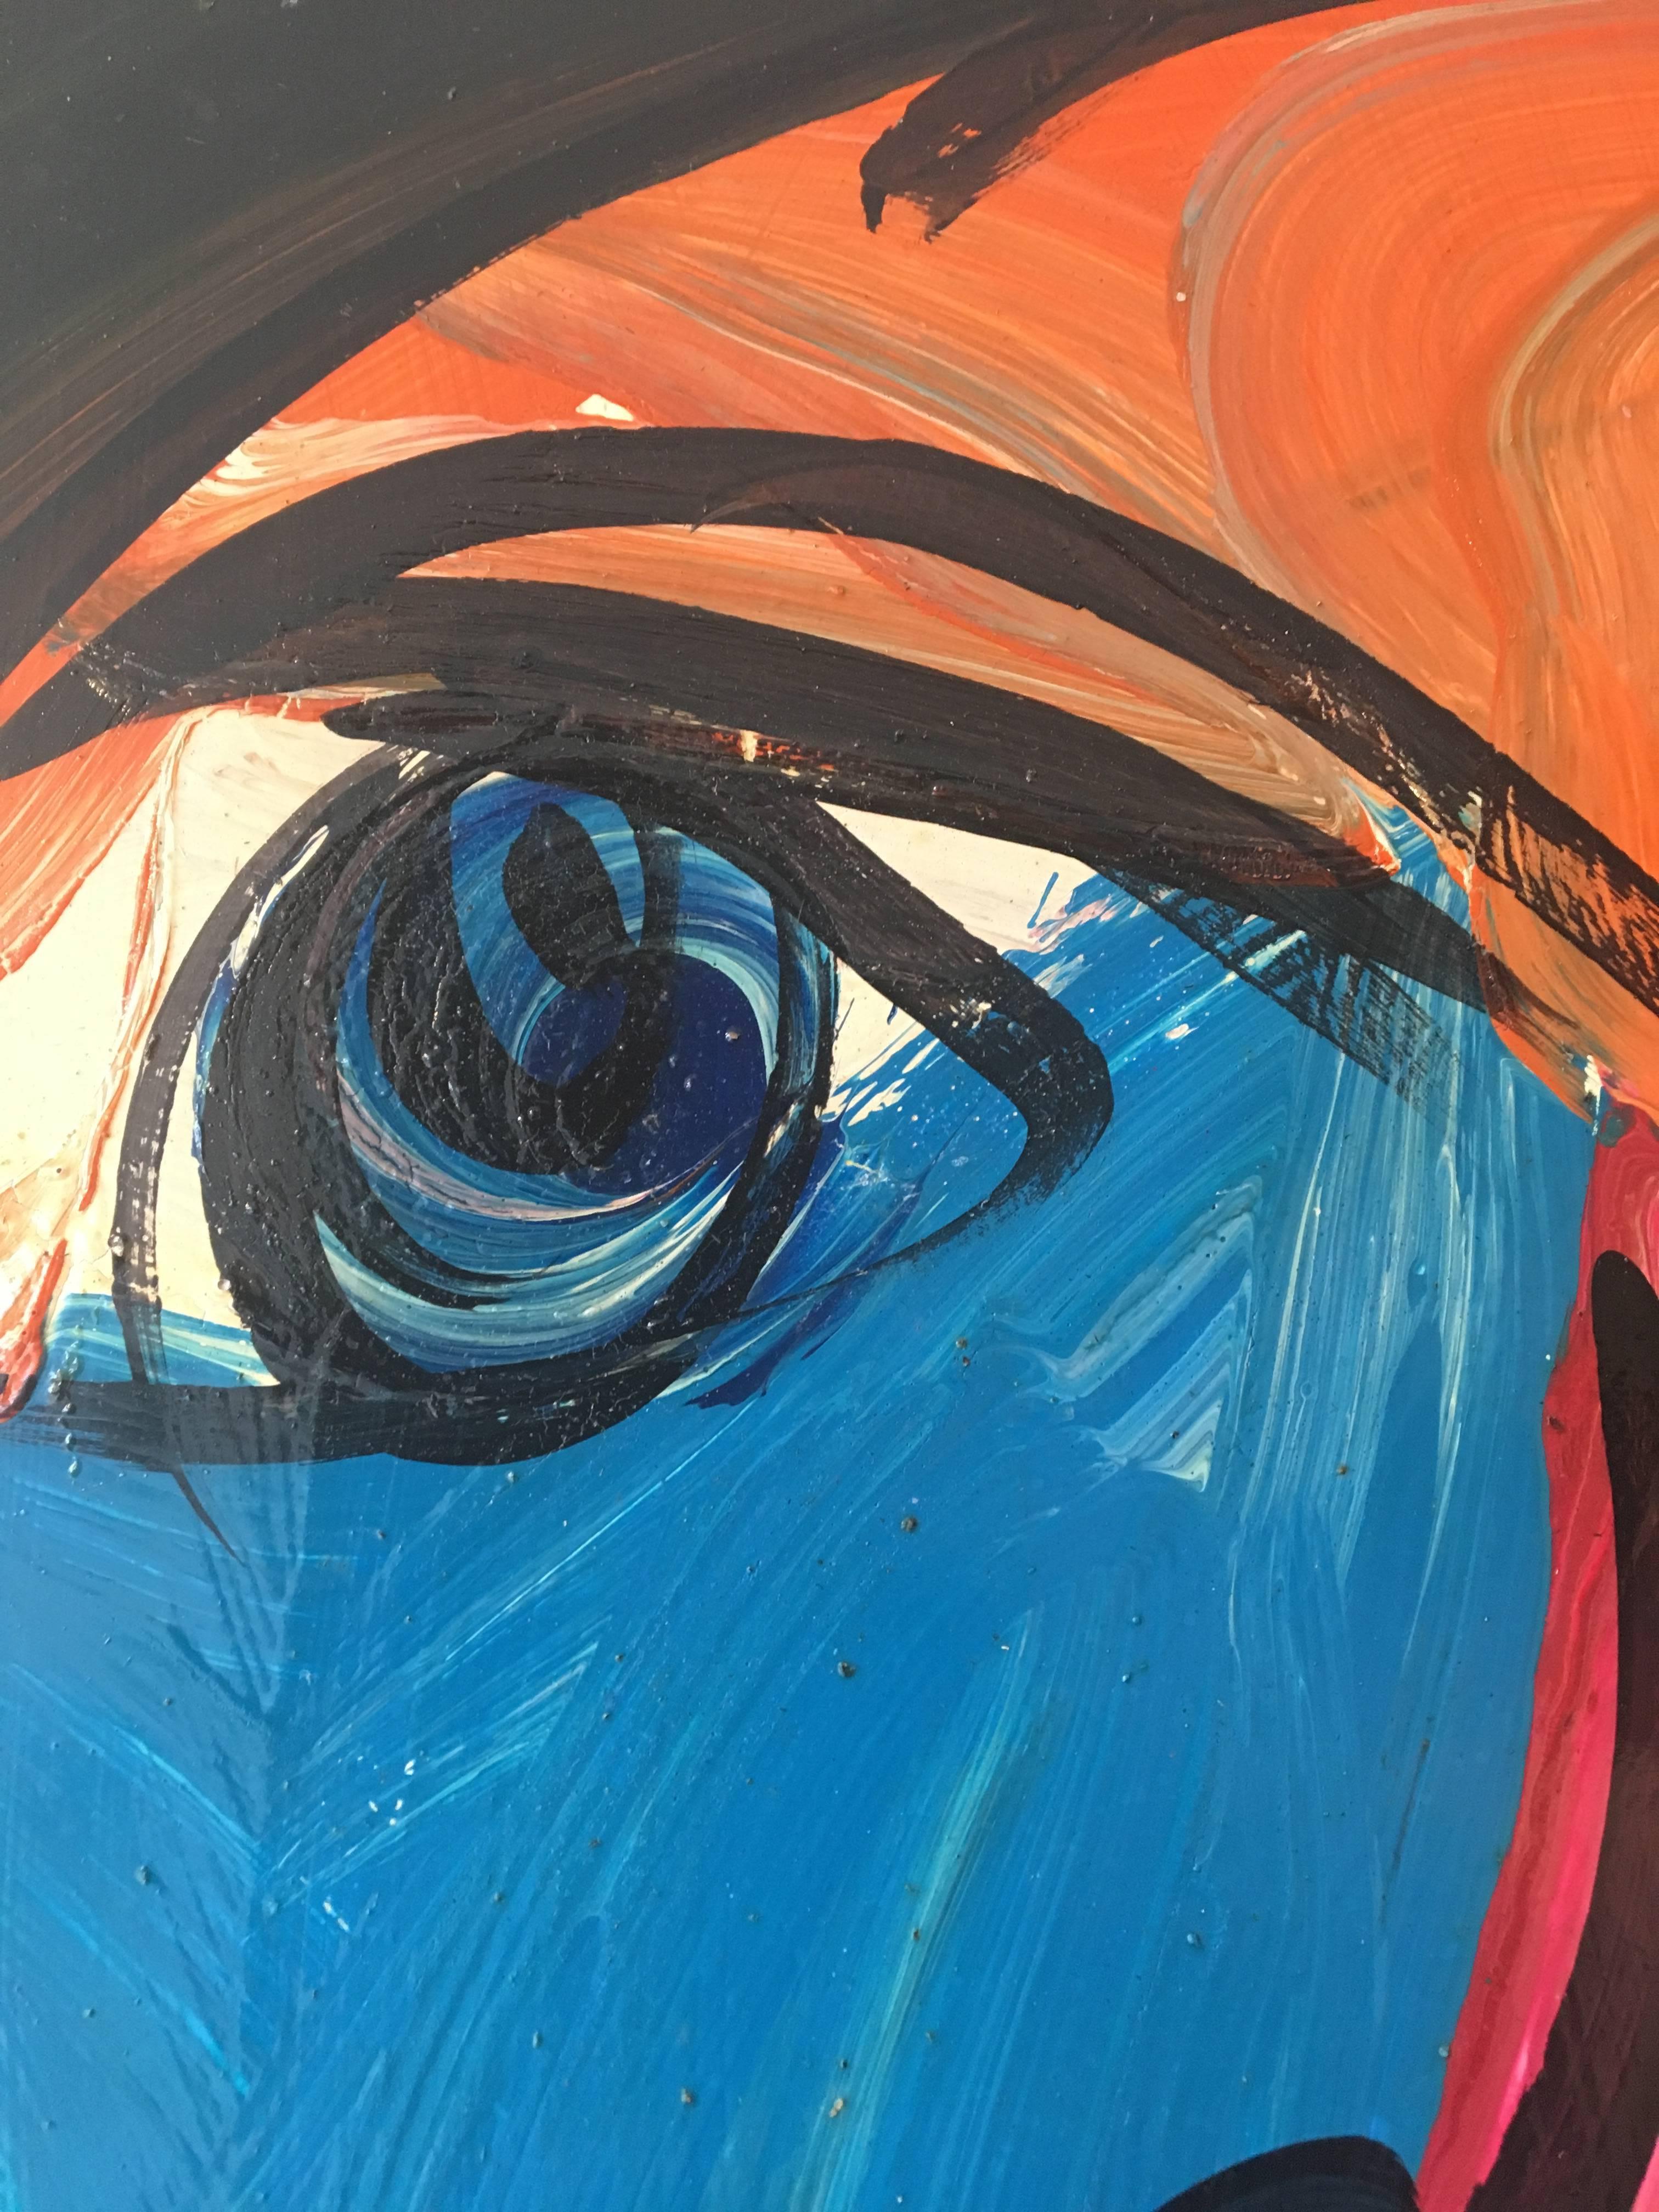 Very expressive  face by Peter Robert Keil. The piece was painted in Barlin in 1975 and was included in Peter's solo exhibition at the Peanut Gallery in June of 2017. It measure 24 high x 20 wide unframed. It is currently framed in a dark wood